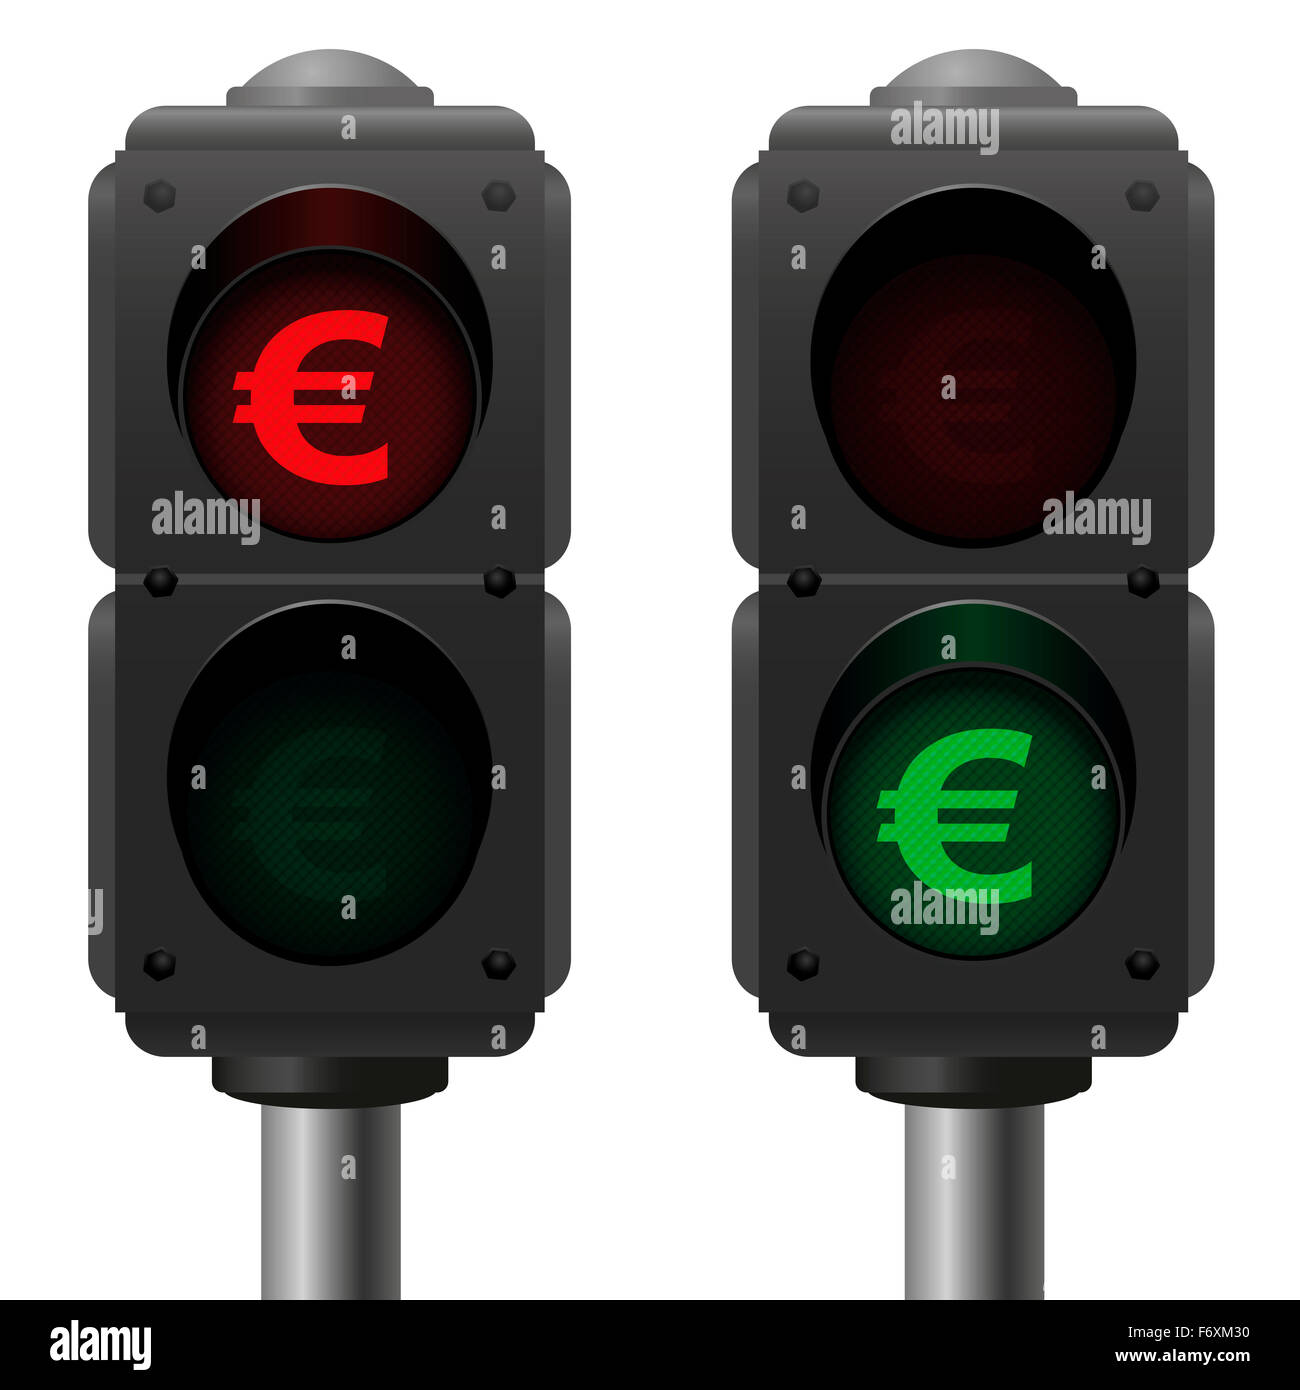 Euro traffic lights, as a symbol for good and bad finances. Illustration on white background. Stock Photo